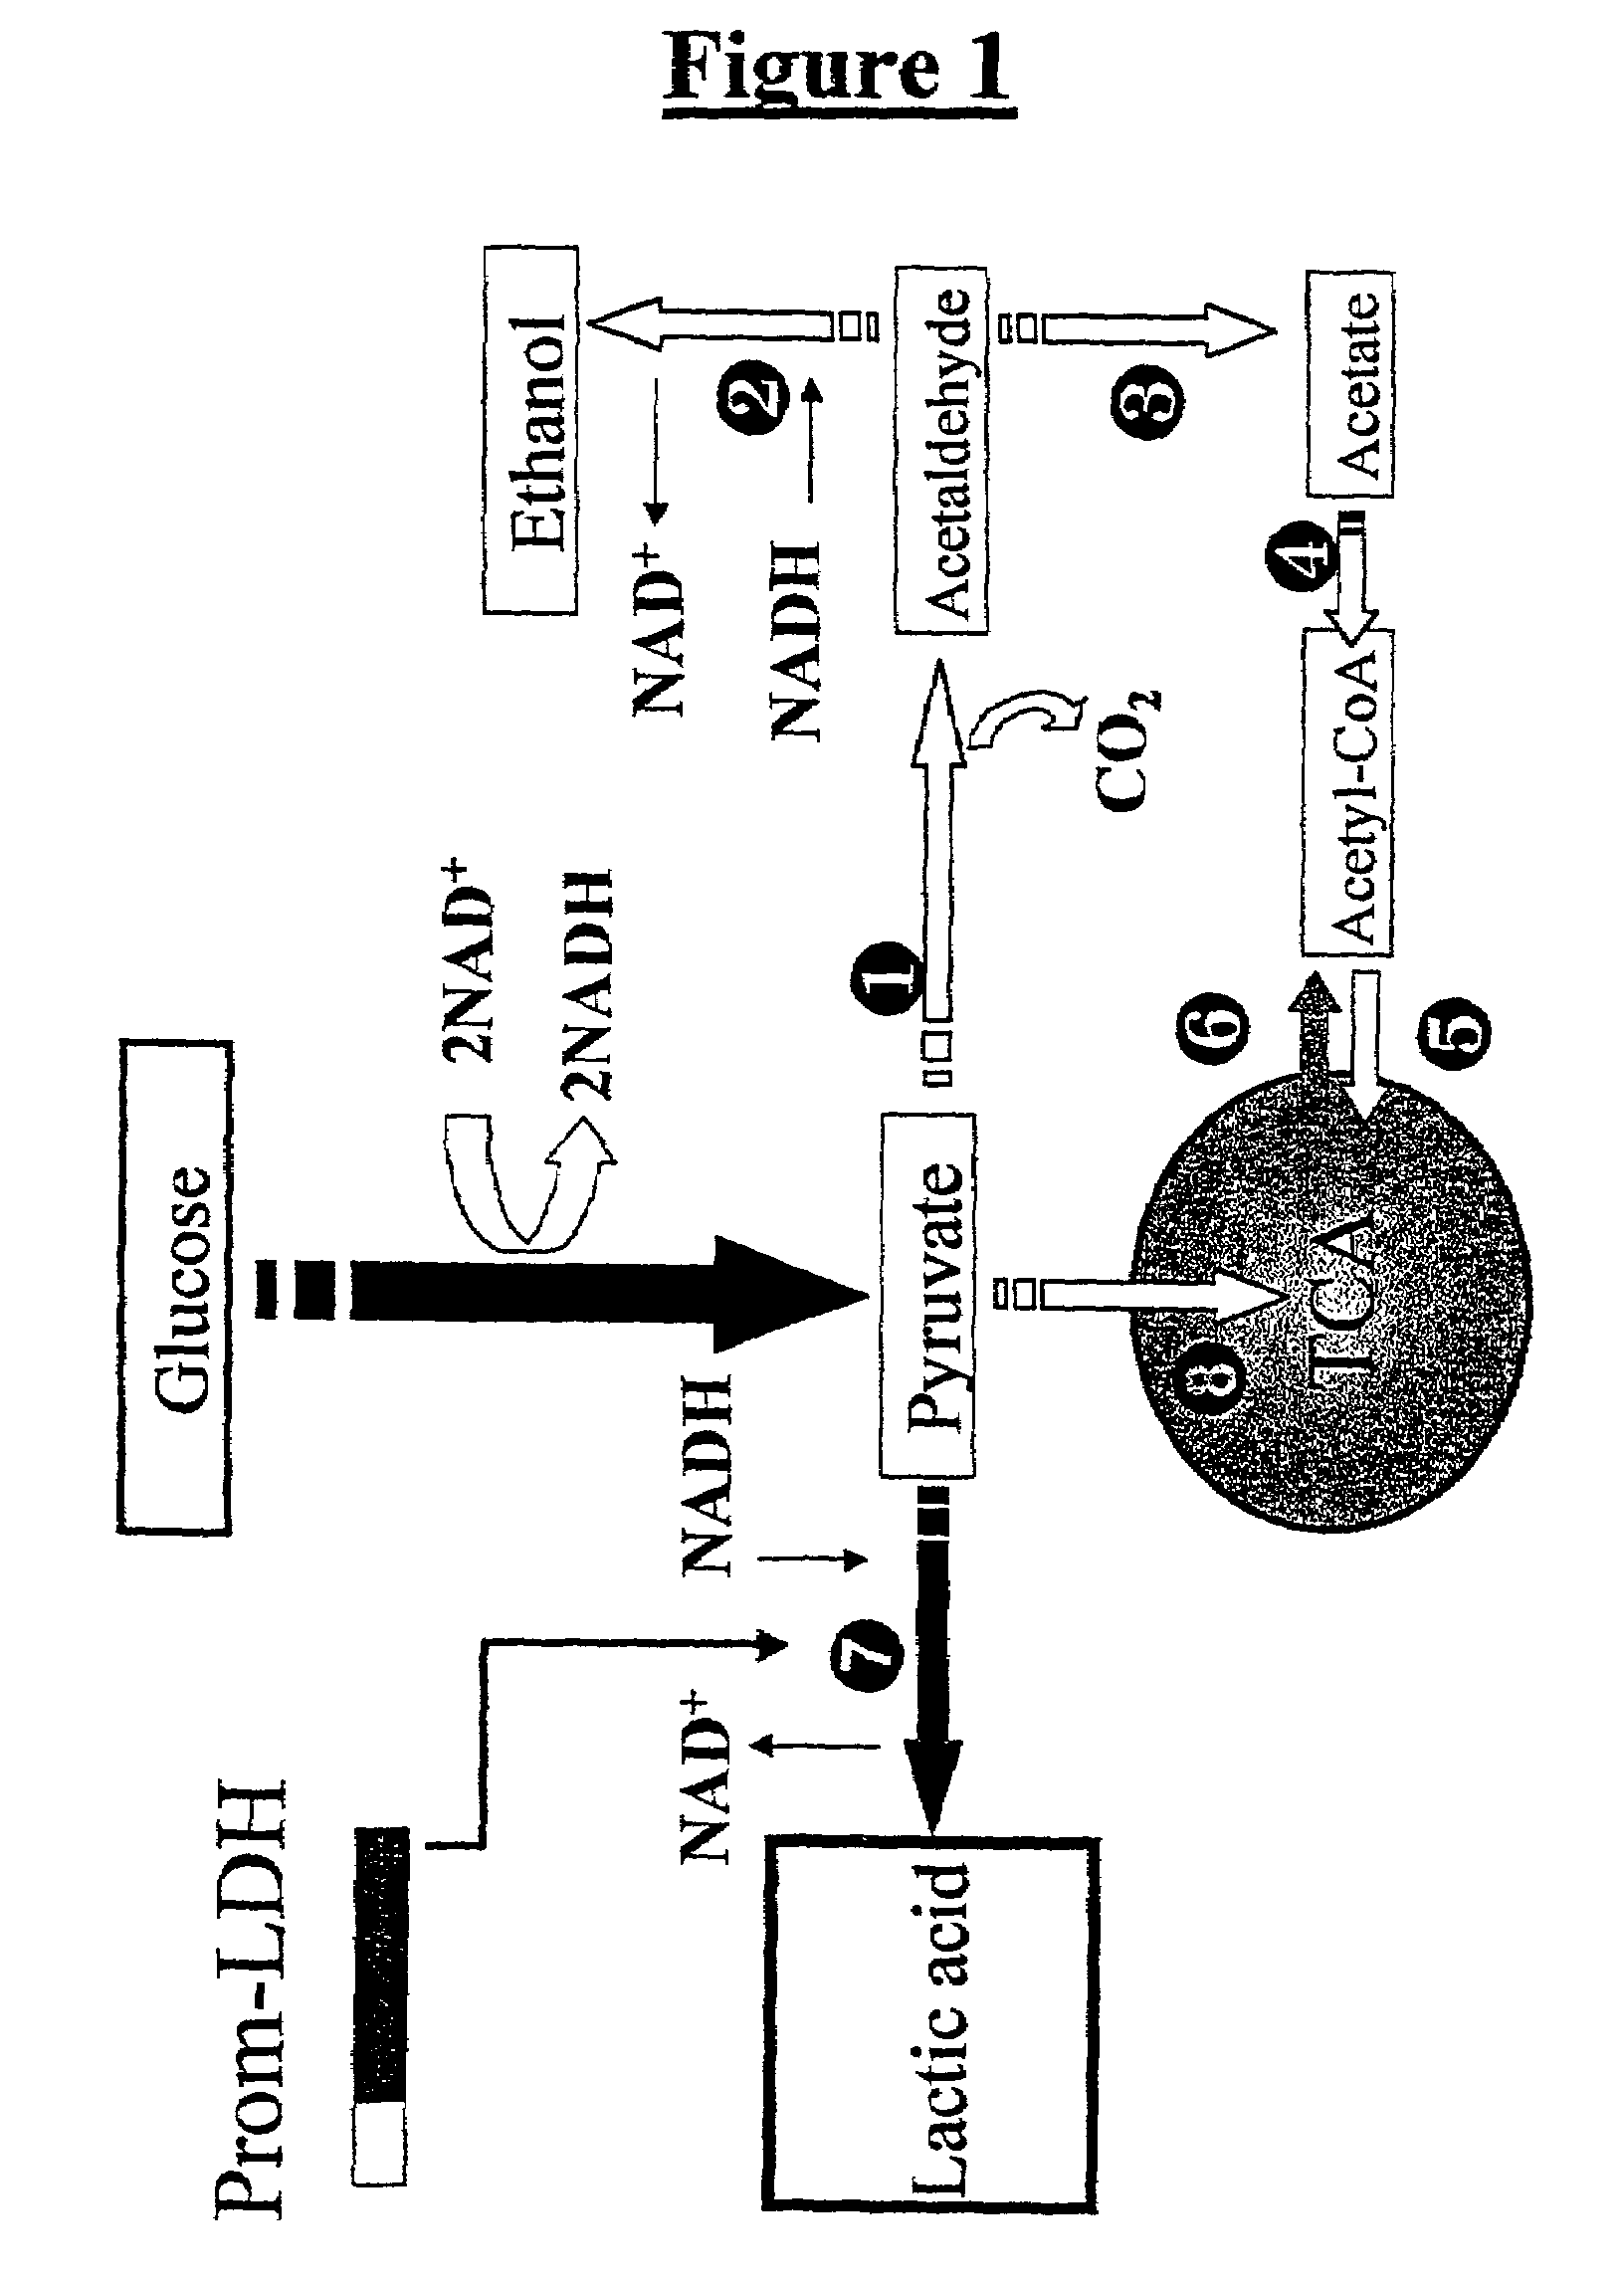 Processes for producing lactic acid using yeast transformed with a gene encoding lactate dehydrogenase